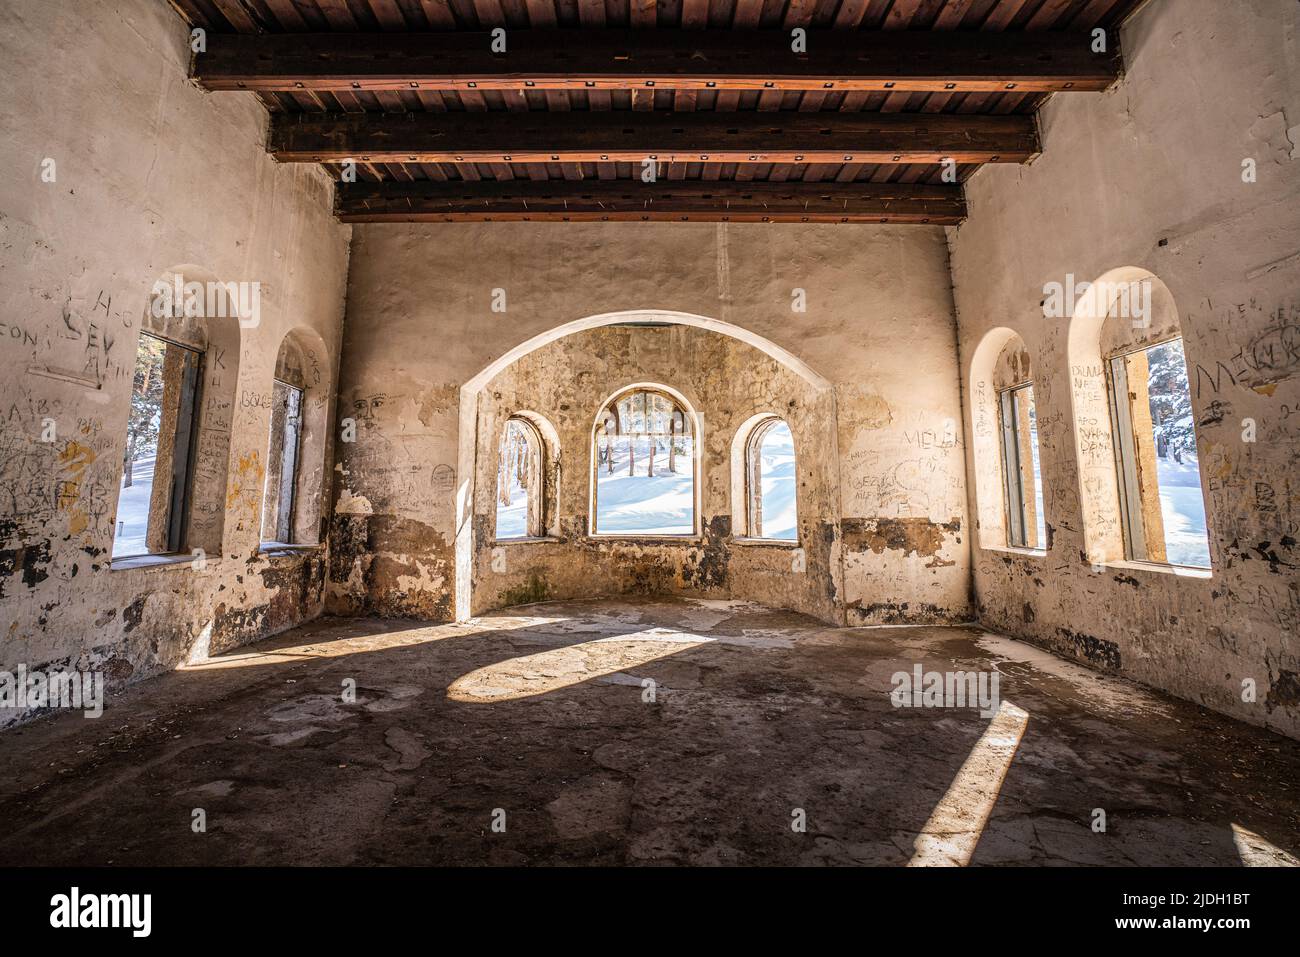 Interior view of ruined and abondened Catherine Palace in Kars, Turkey. High quality photo Stock Photo